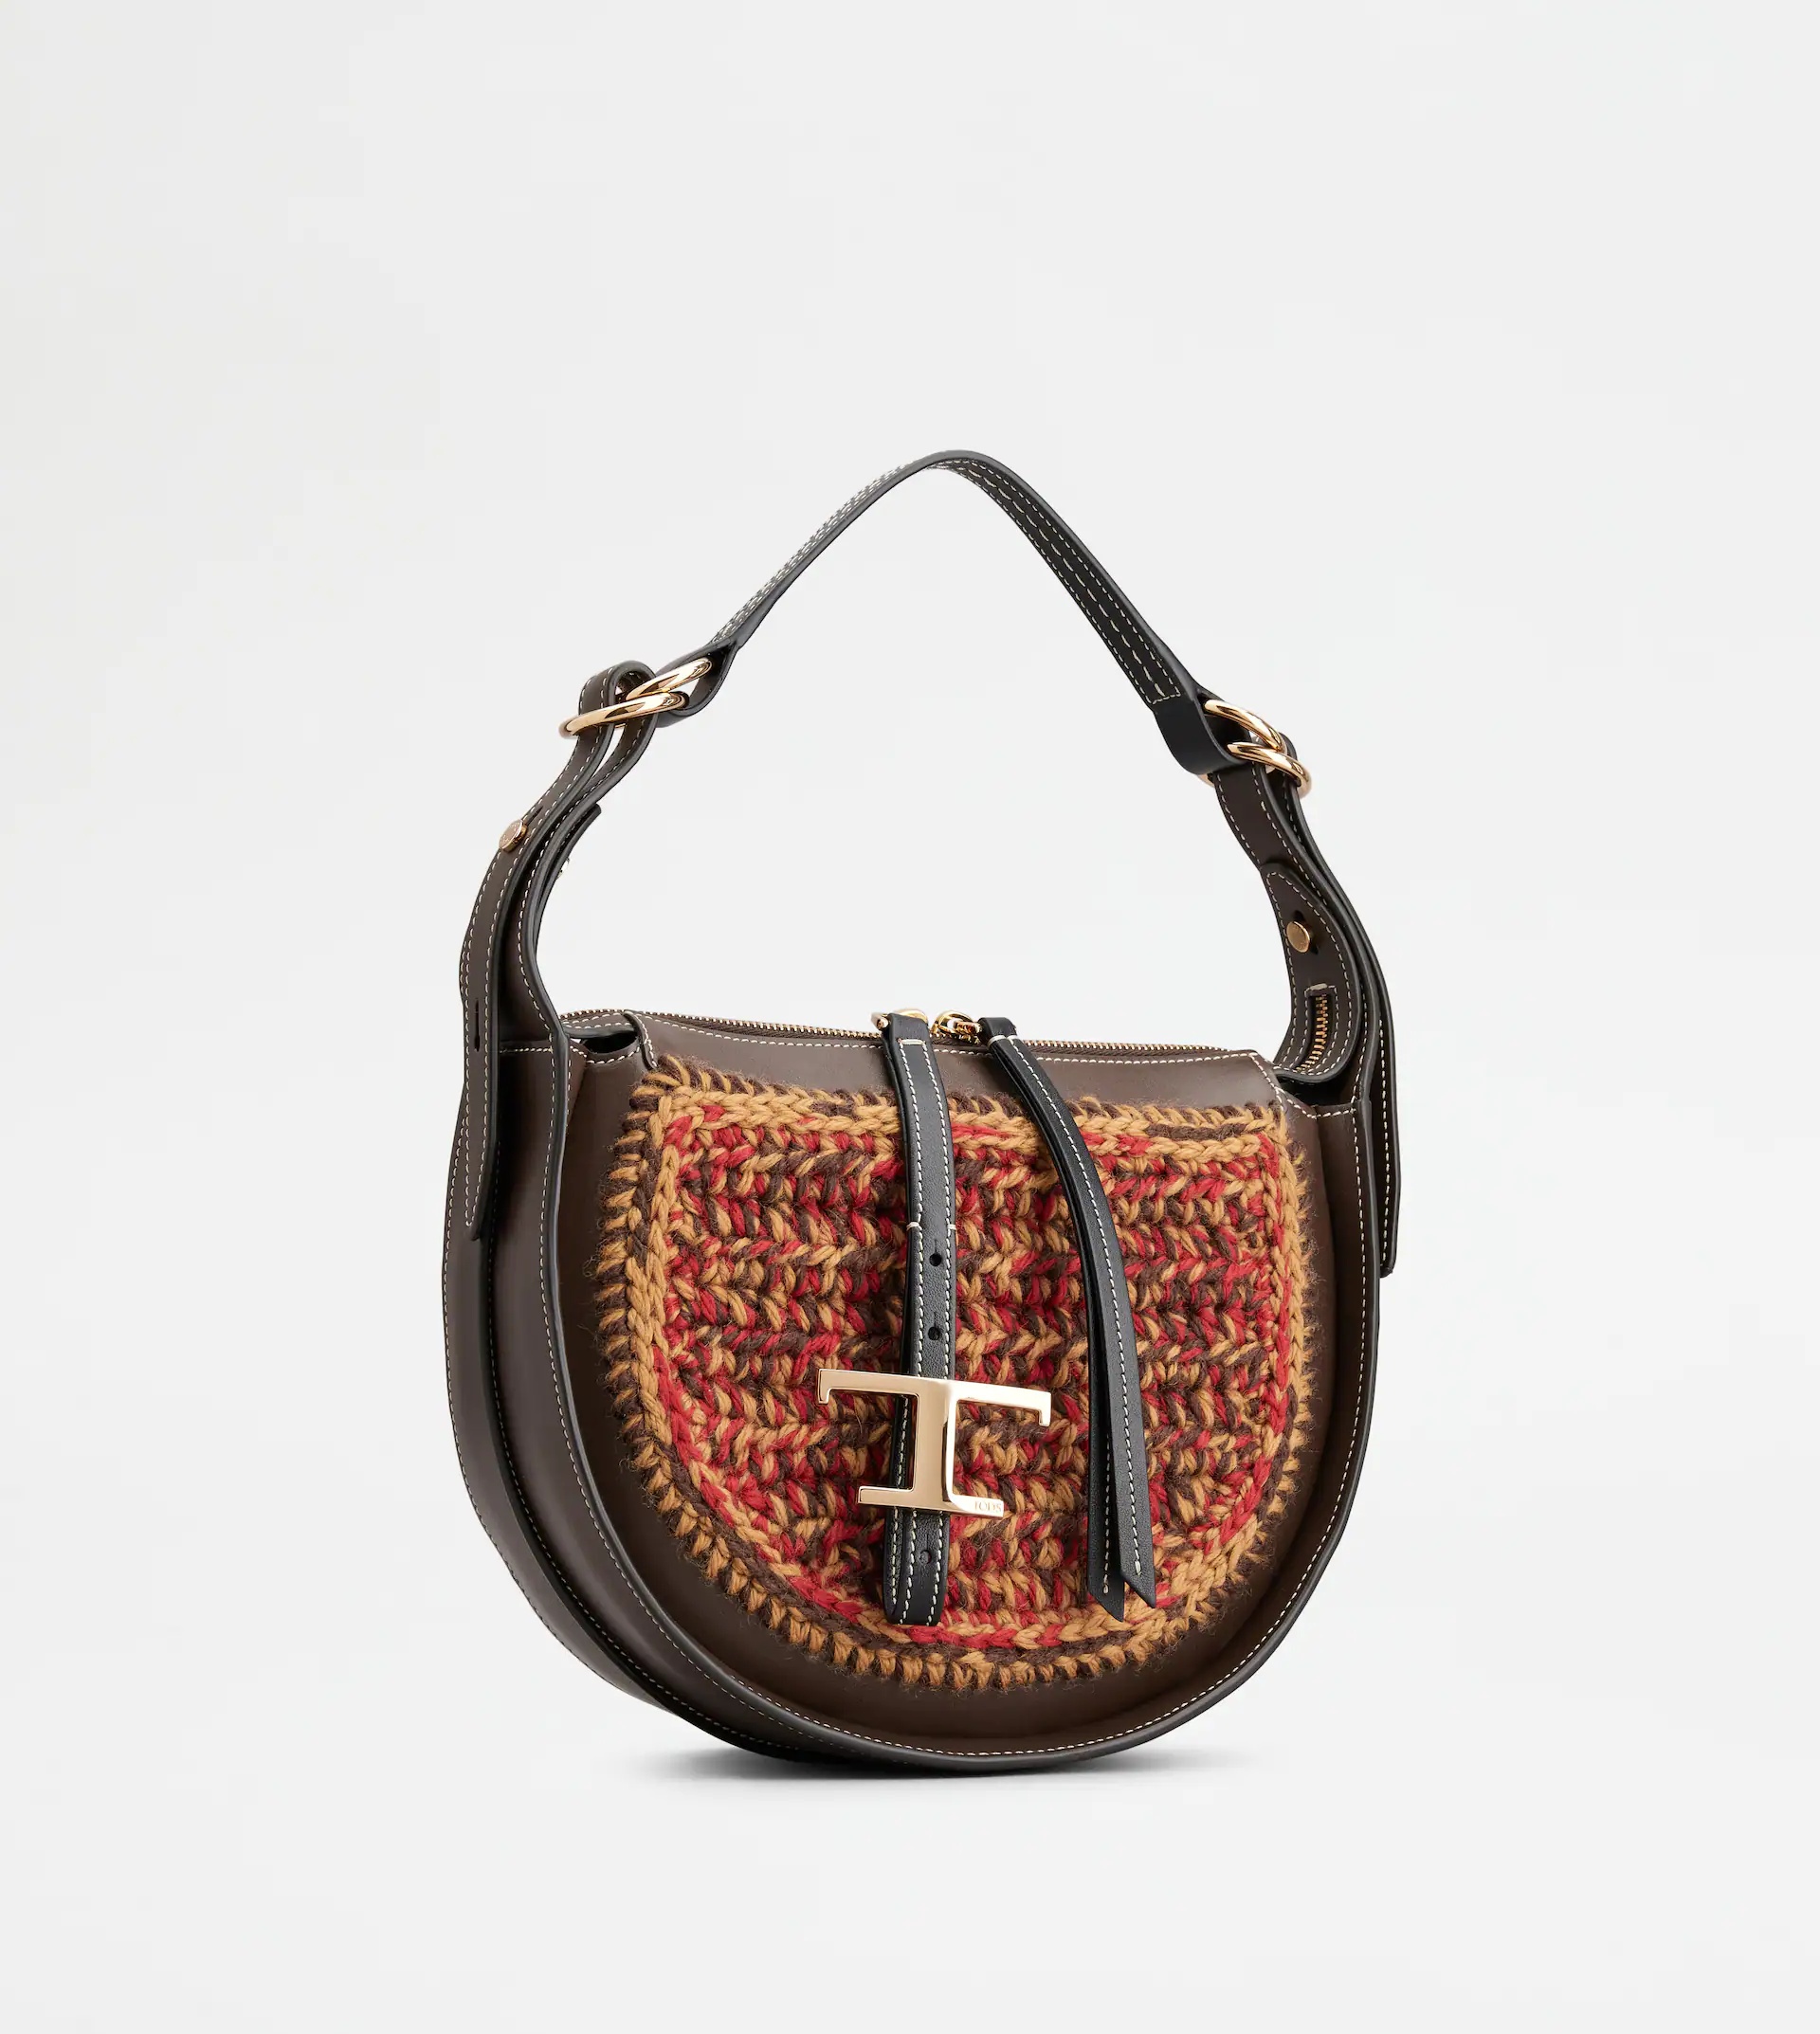 TIMELESS HOBO BAG IN LEATHER AND WOOL SMALL - BROWN, RED, BEIGE - 3